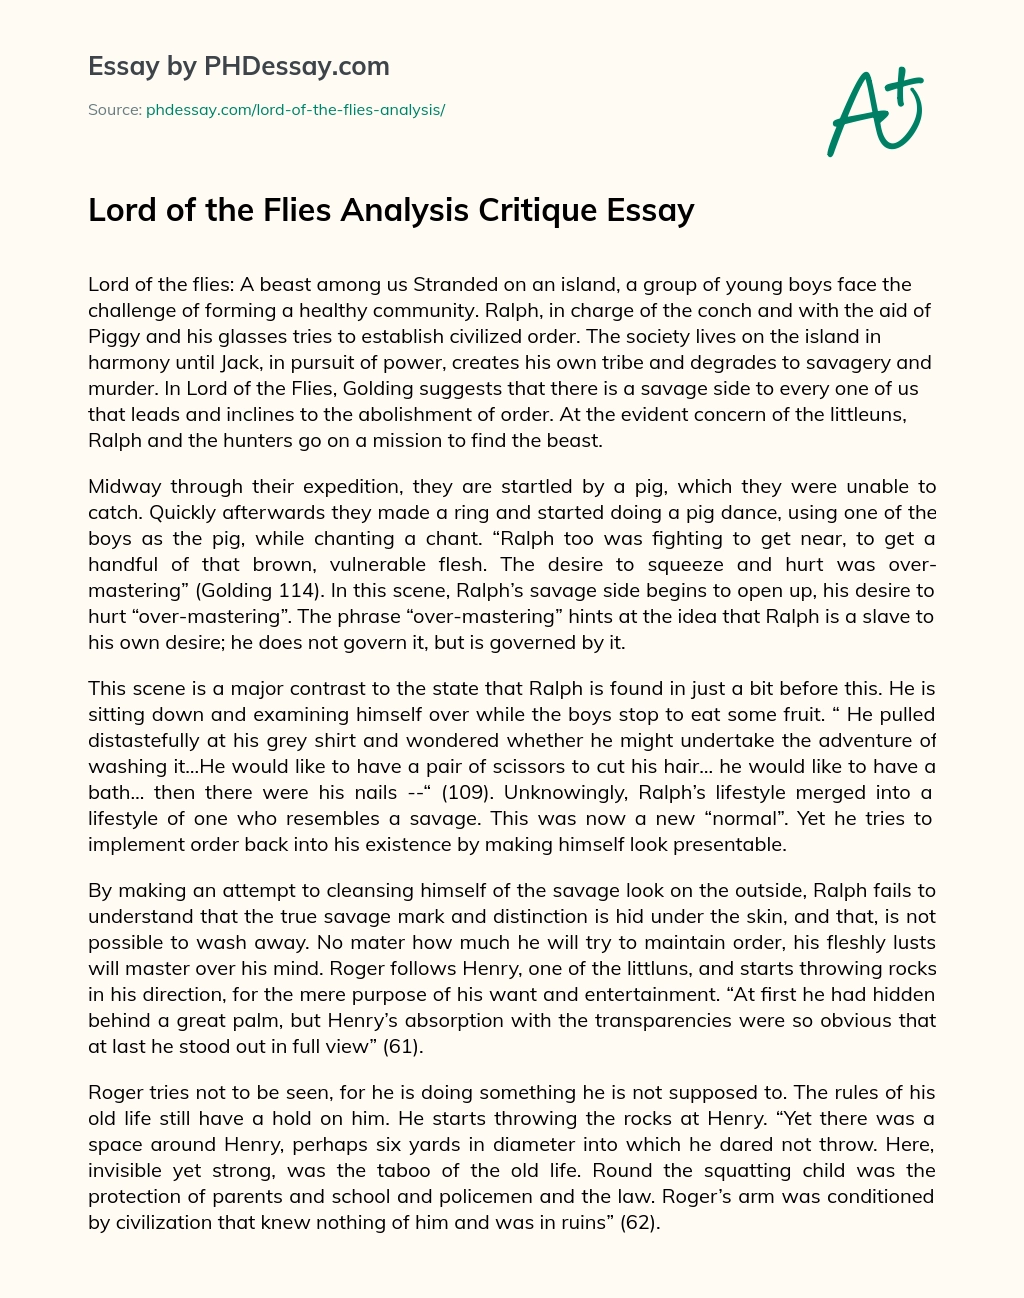 Lord of the Flies Analysis Critique Essay essay